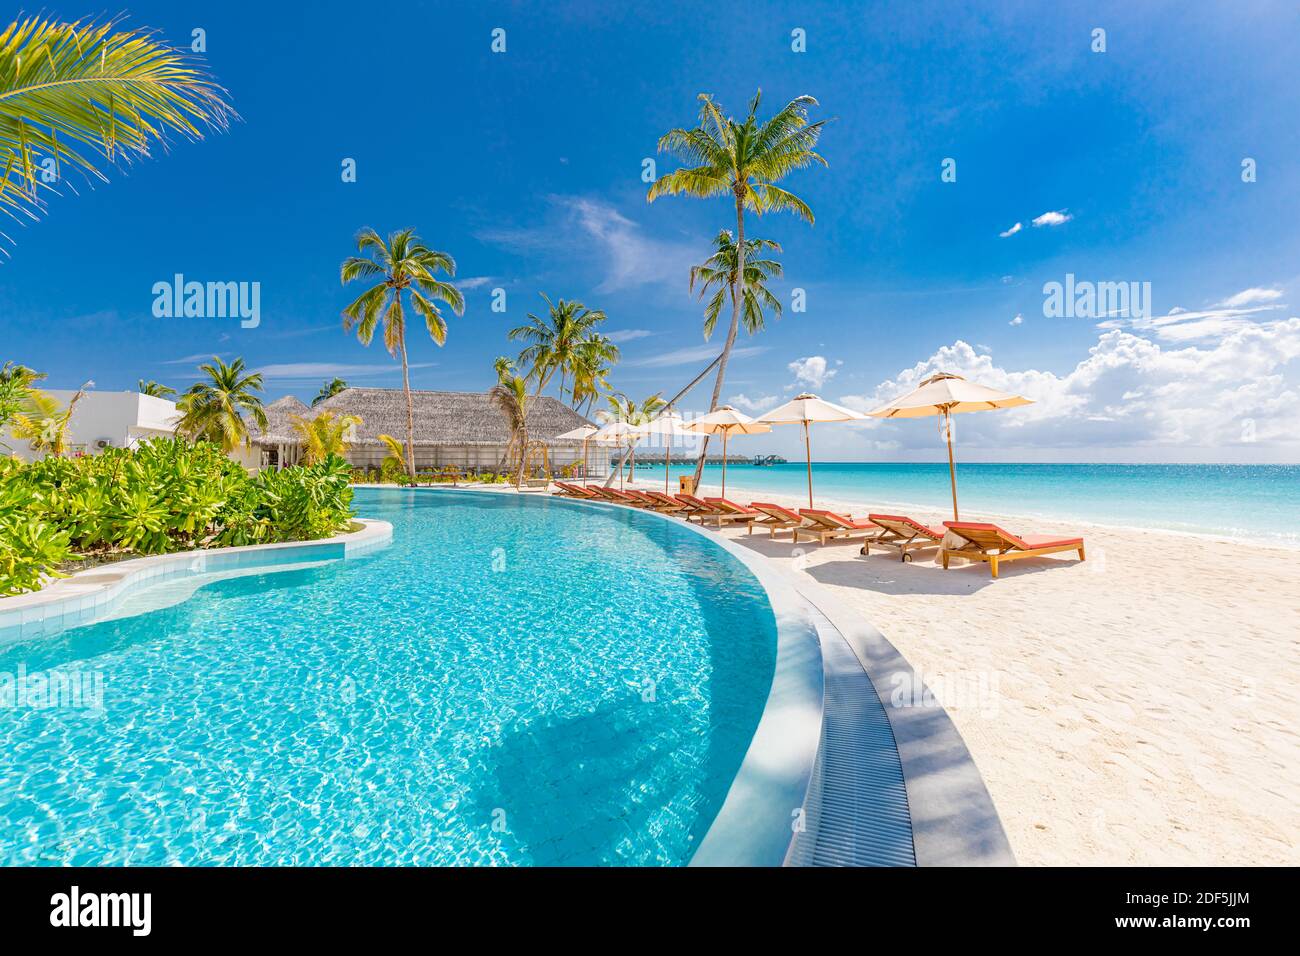 Beach landscape. Luxurious beach resort with swimming pool and beach chairs or loungers under umbrellas with palm trees, vacation, travel holiday Stock Photo